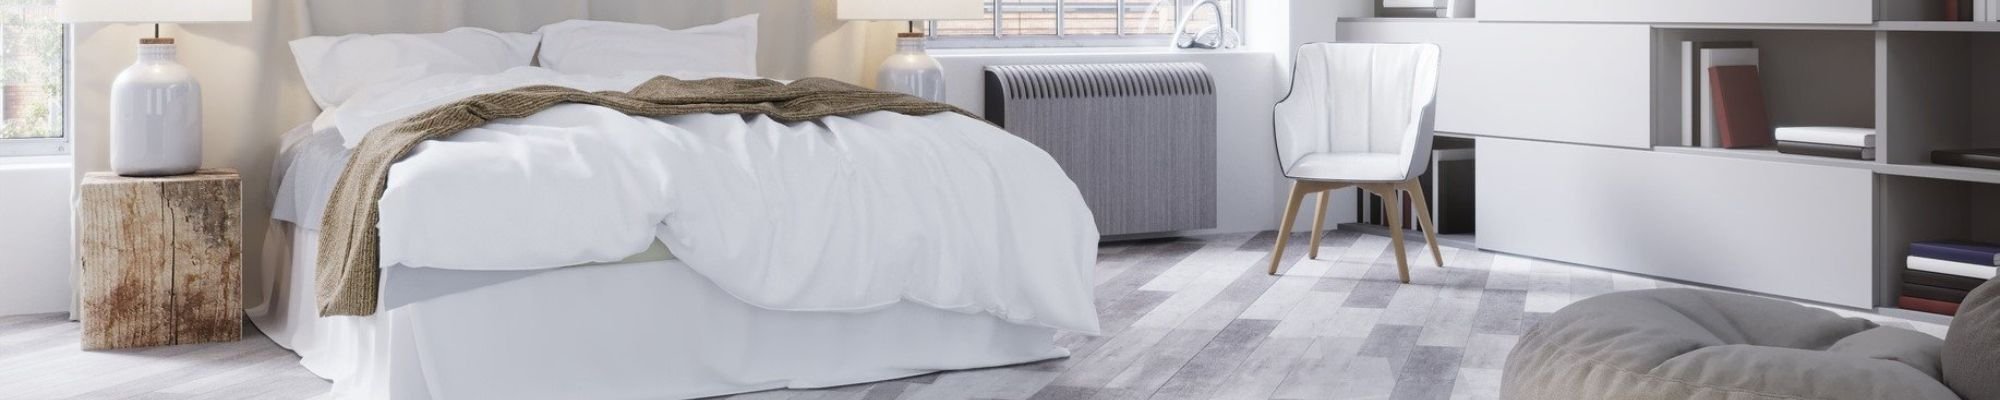 white mattresses from Henson's Greater Tennessee Flooring in Knoxville TN